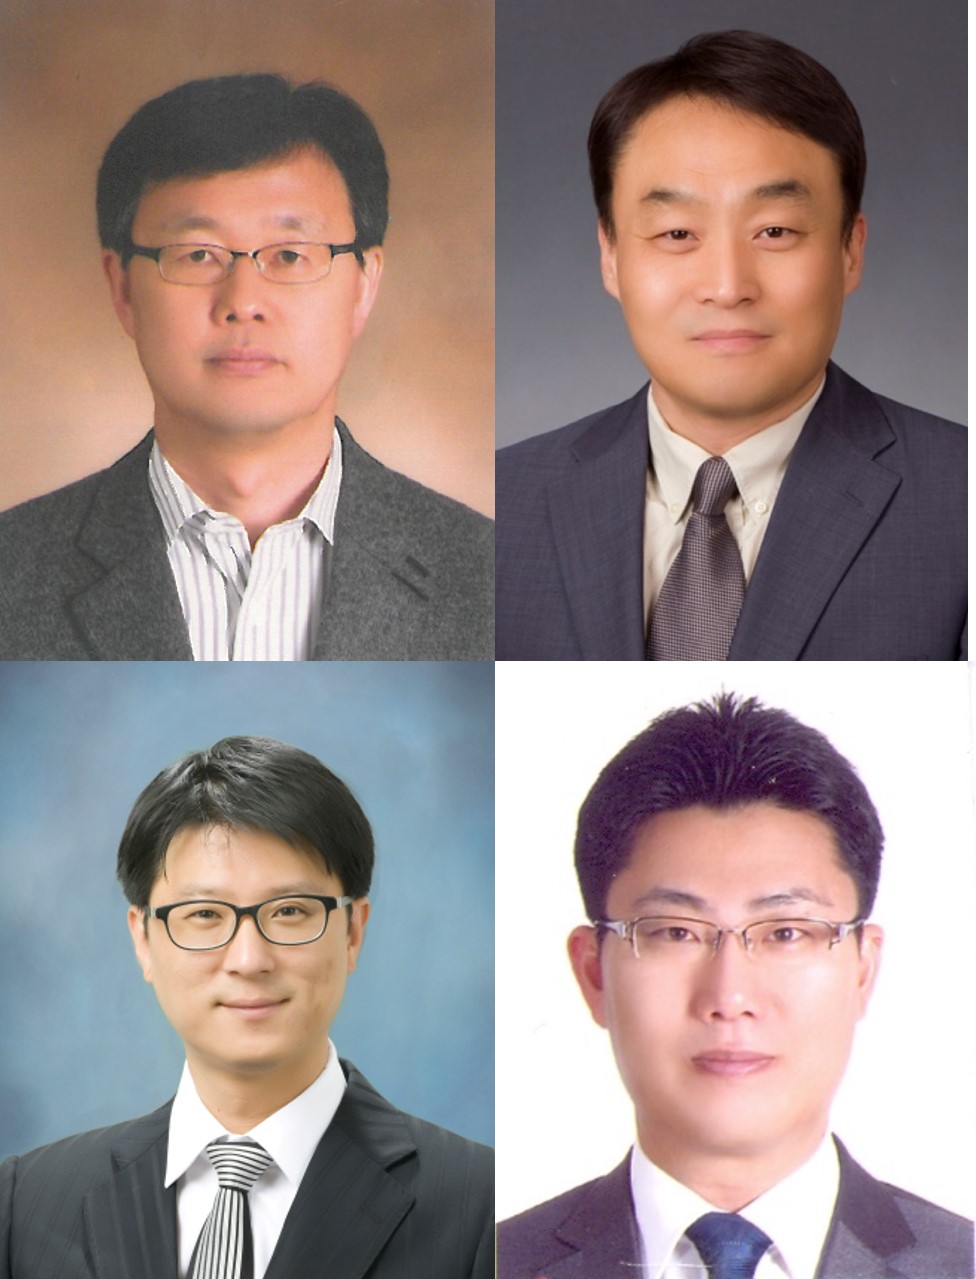 GIST produces 4 winners for science and technology promotion award 이미지